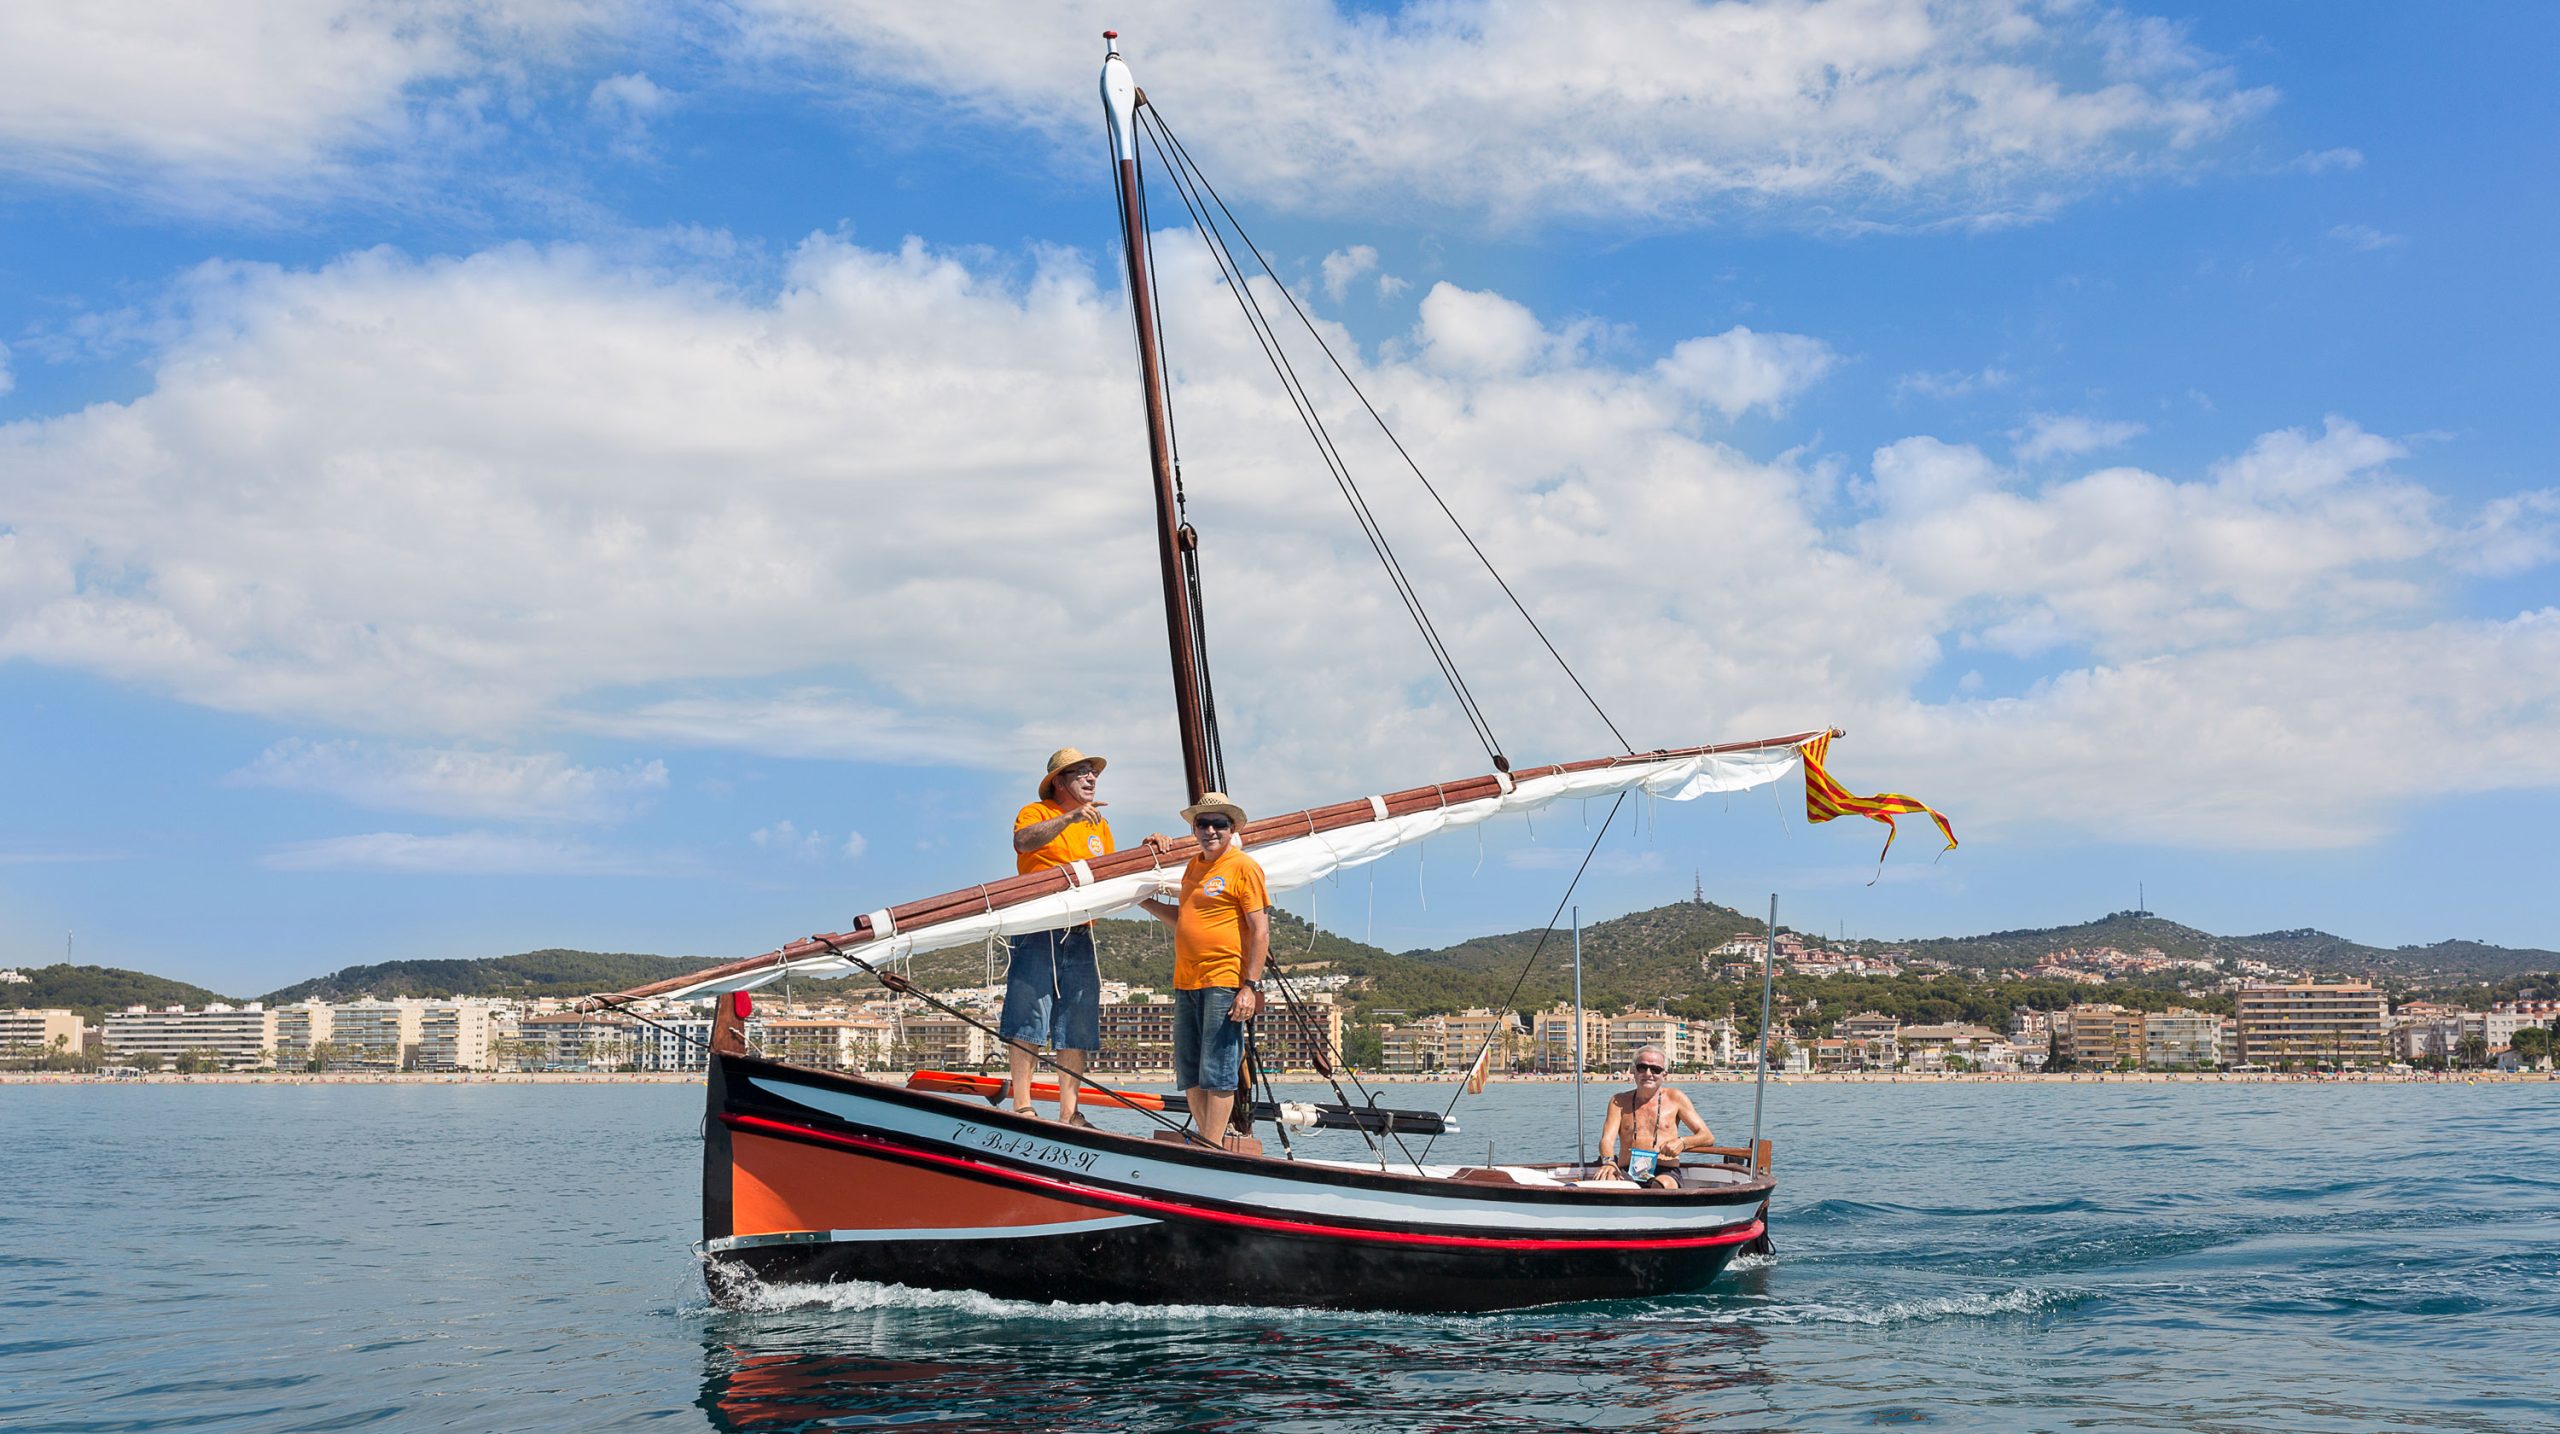 Three people on a lateen-rigged sailboat